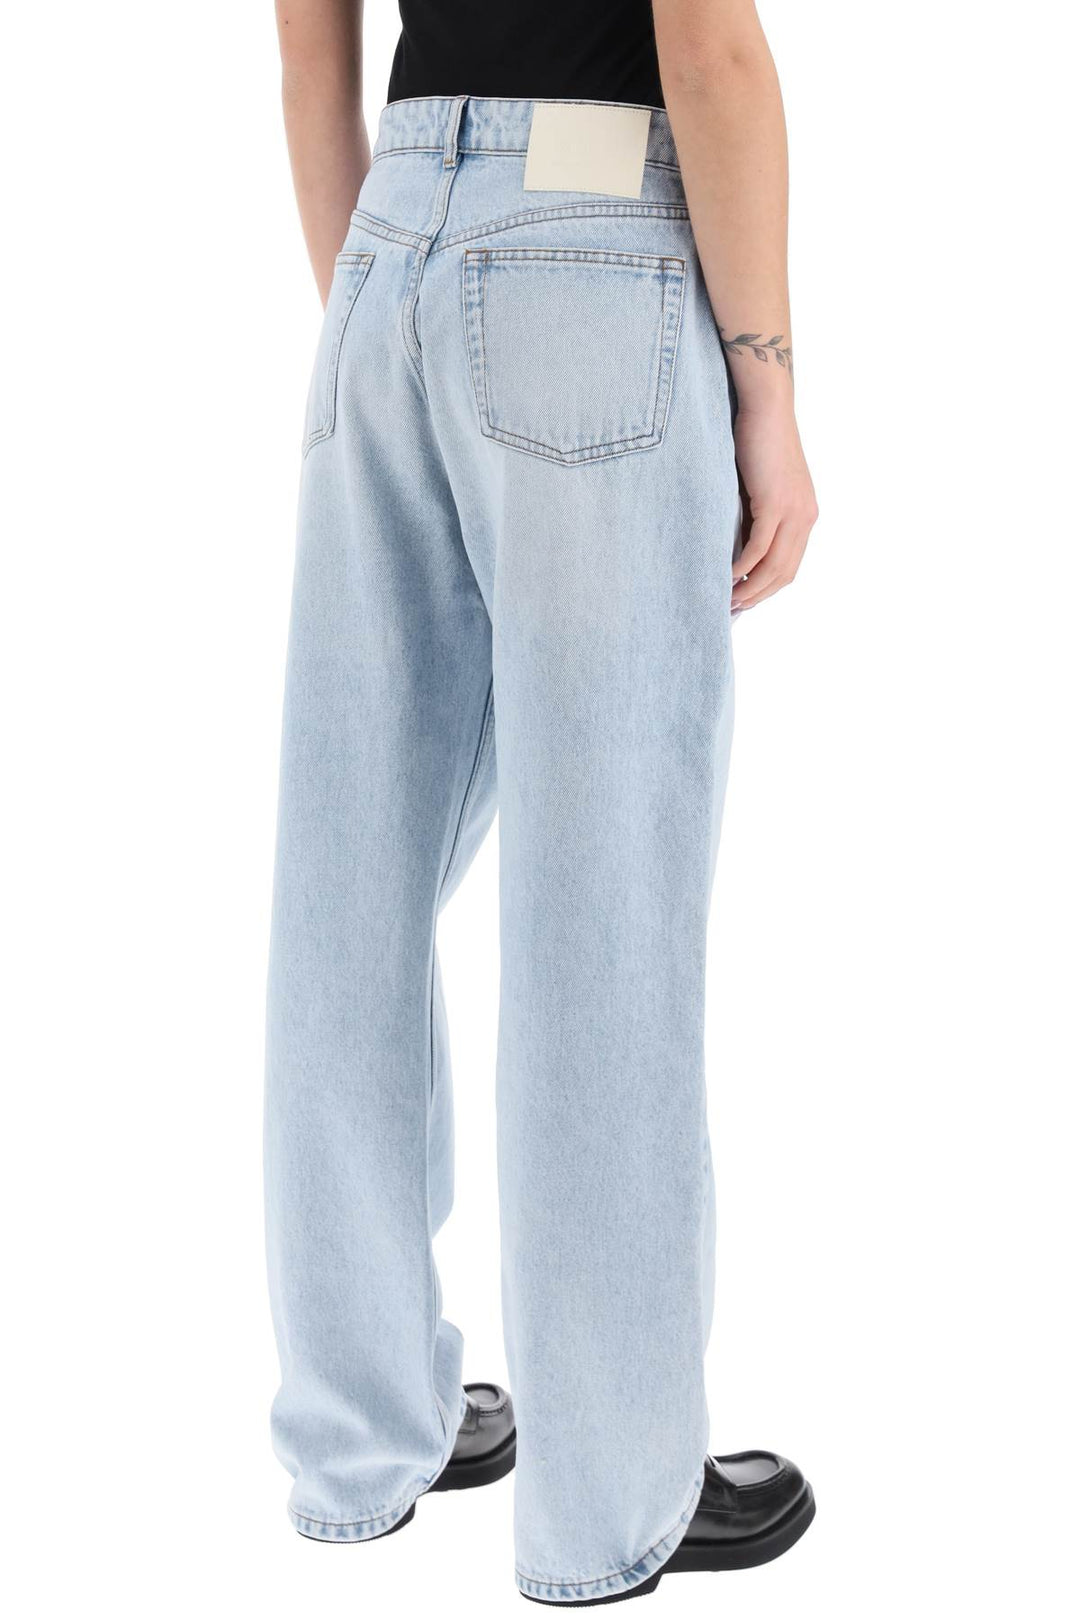 Ami paris wide leg denim jeans with a relaxed fit-3